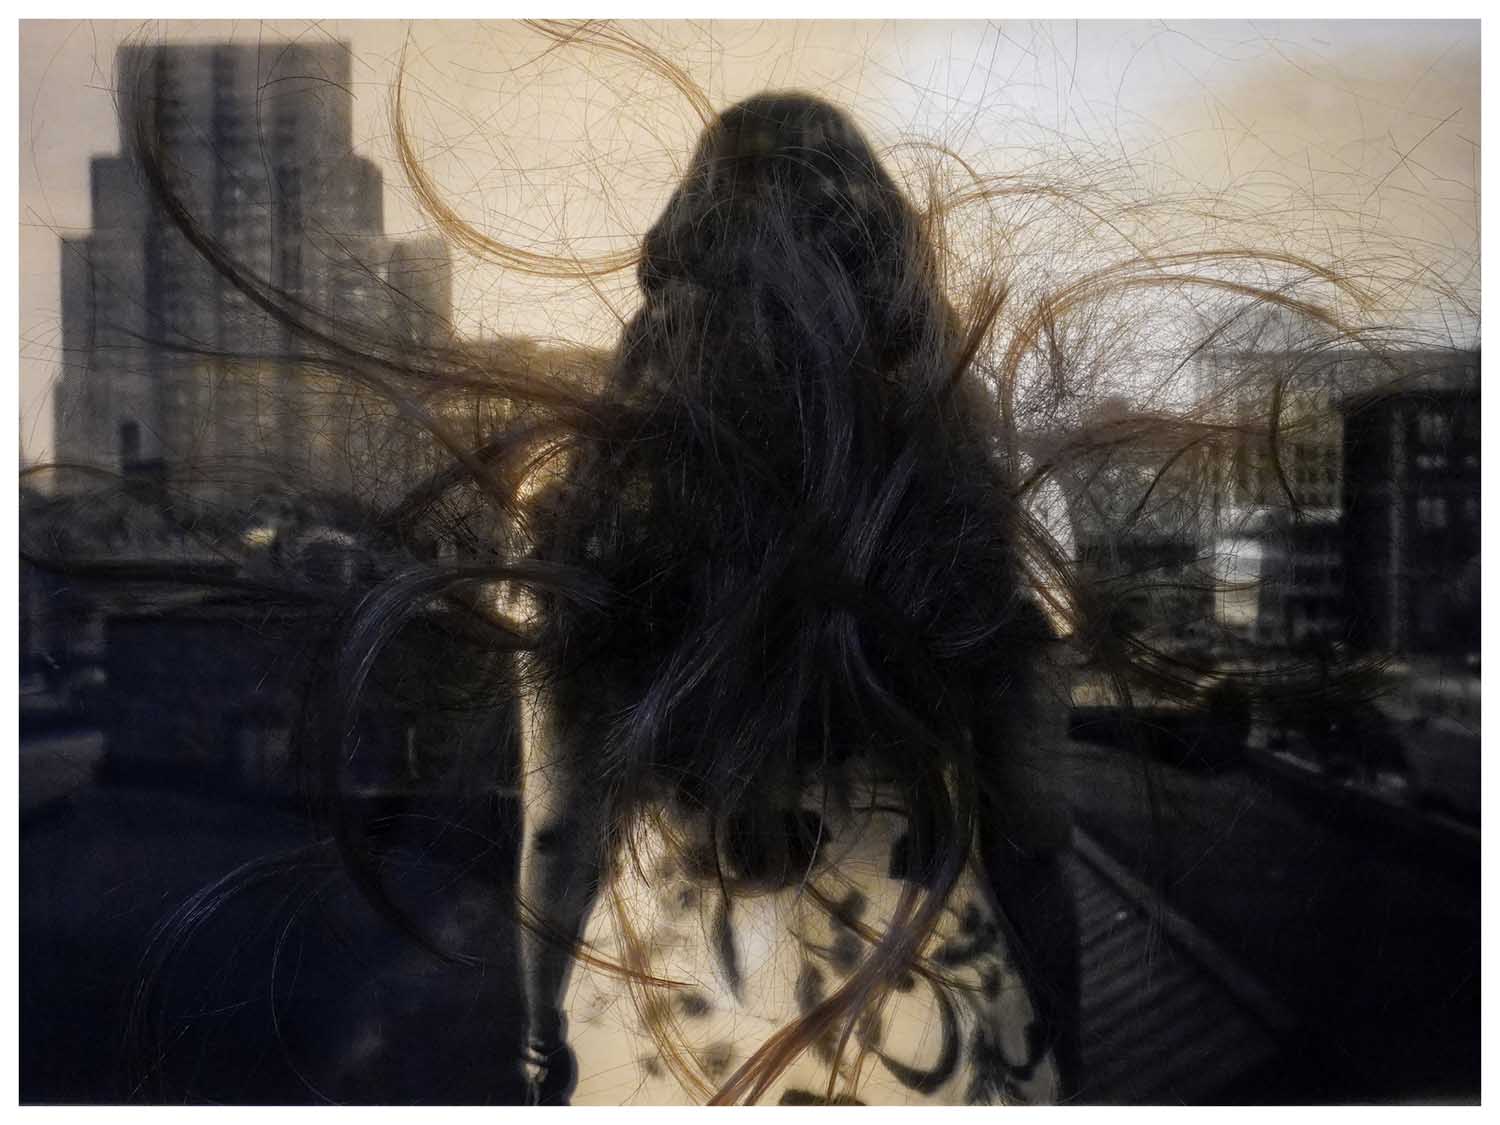 André Werner, Her Hair IV a, 2023 Installation based photograph Fine Art print on Baryte paper, Edition of 5 | 2 AP 30 x 40 cm (print), 40 x 50 cm (framed)